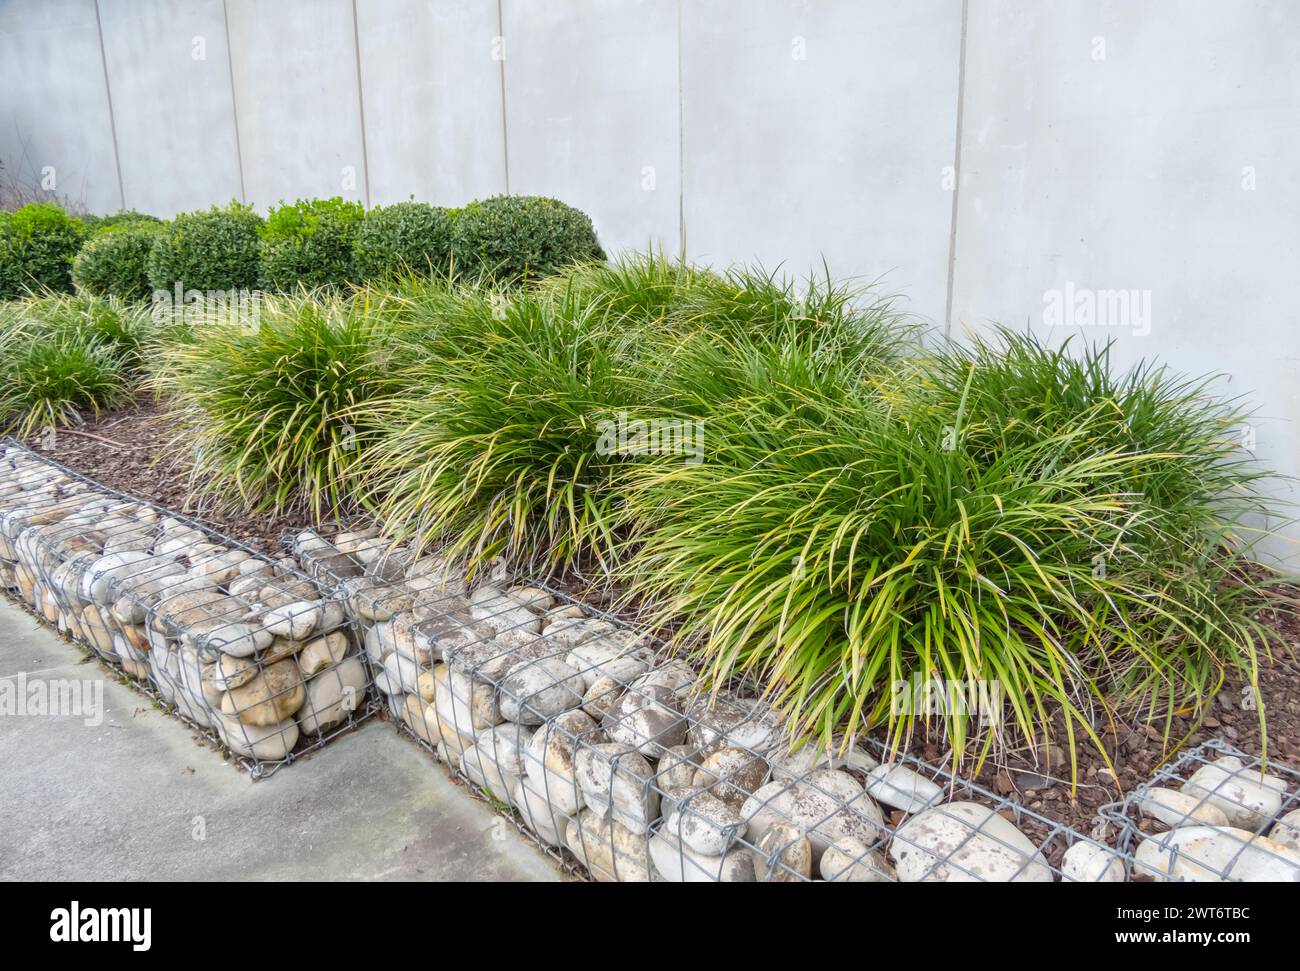 Carex morrowii or kan suge or Morrow's sedge or Japanese grass sedge or Japanese sedge plants. Ornamental grass,pruned bushes and gabion in the urban Stock Photo